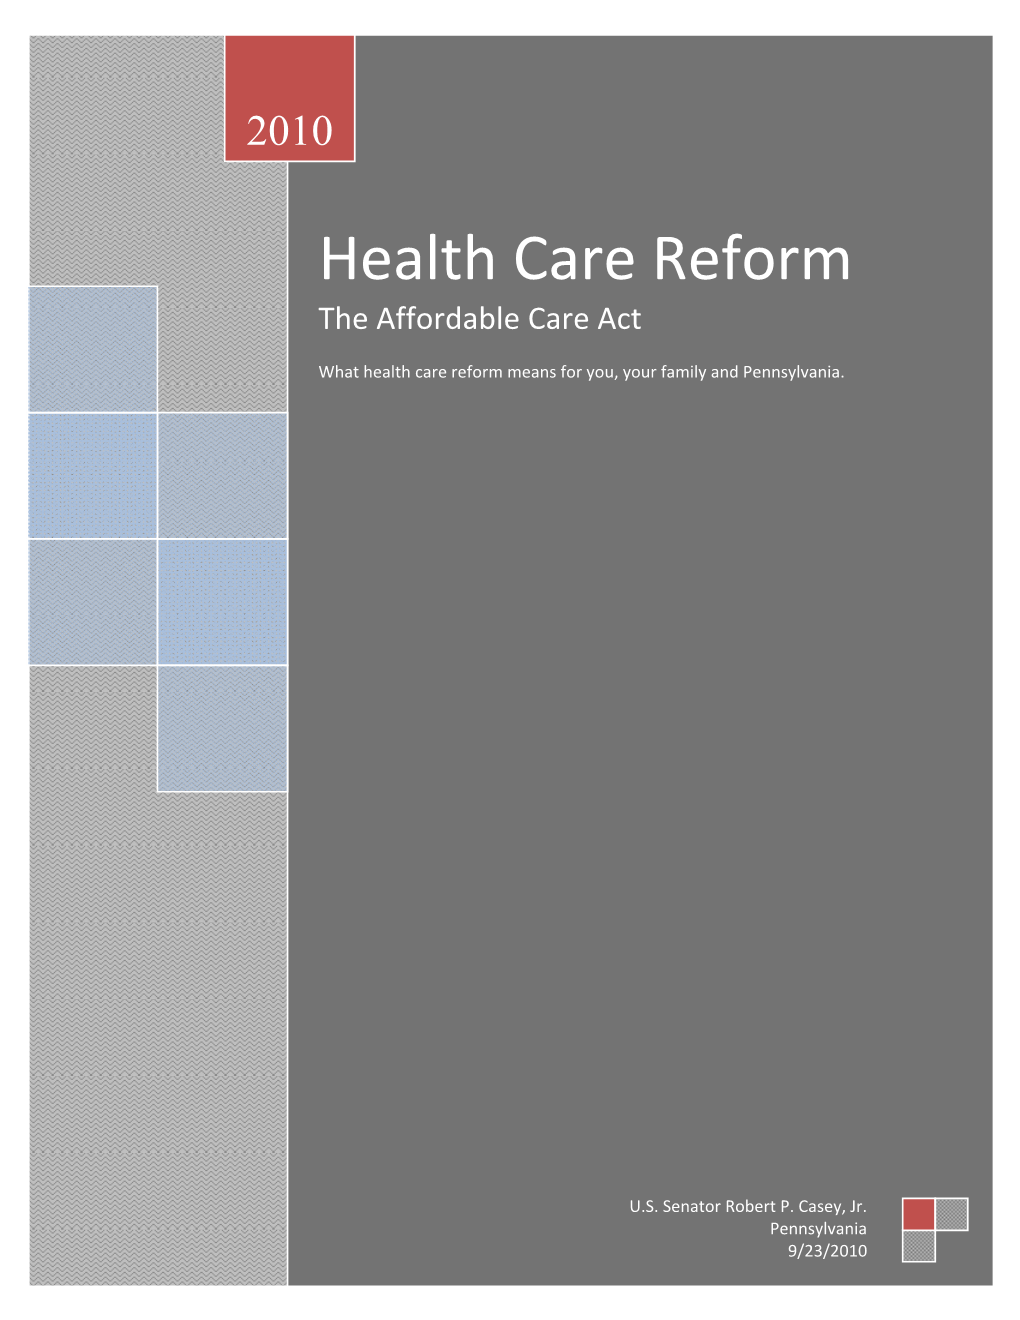 Health Care Reform the Affordable Care Act